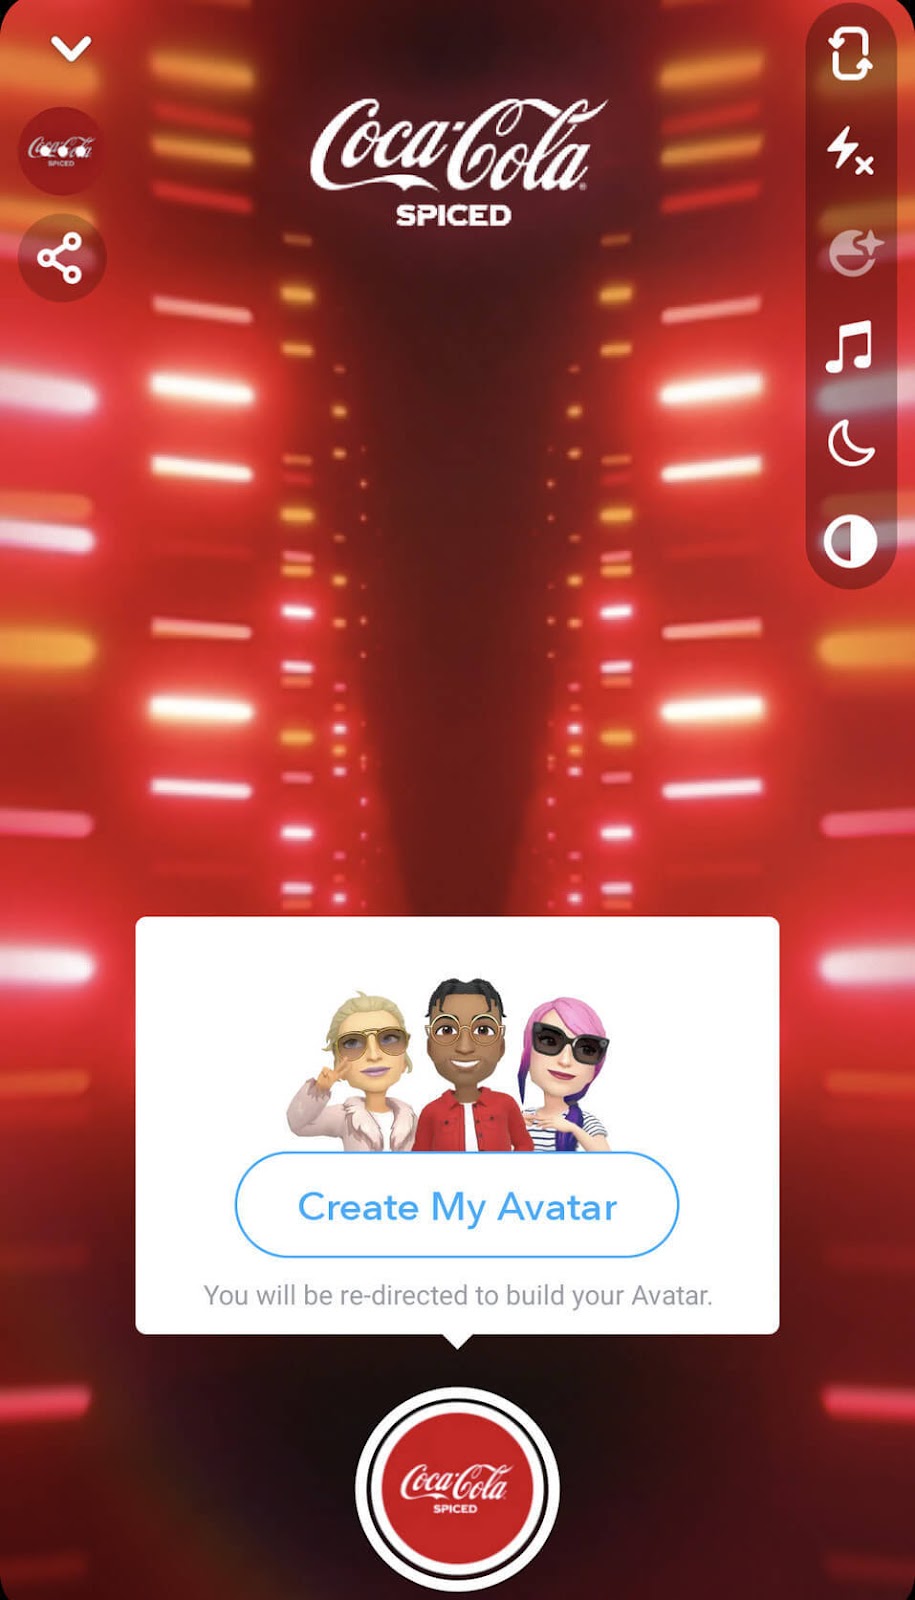 An AR advertisement  from Coca-Cola connected  Snapchat